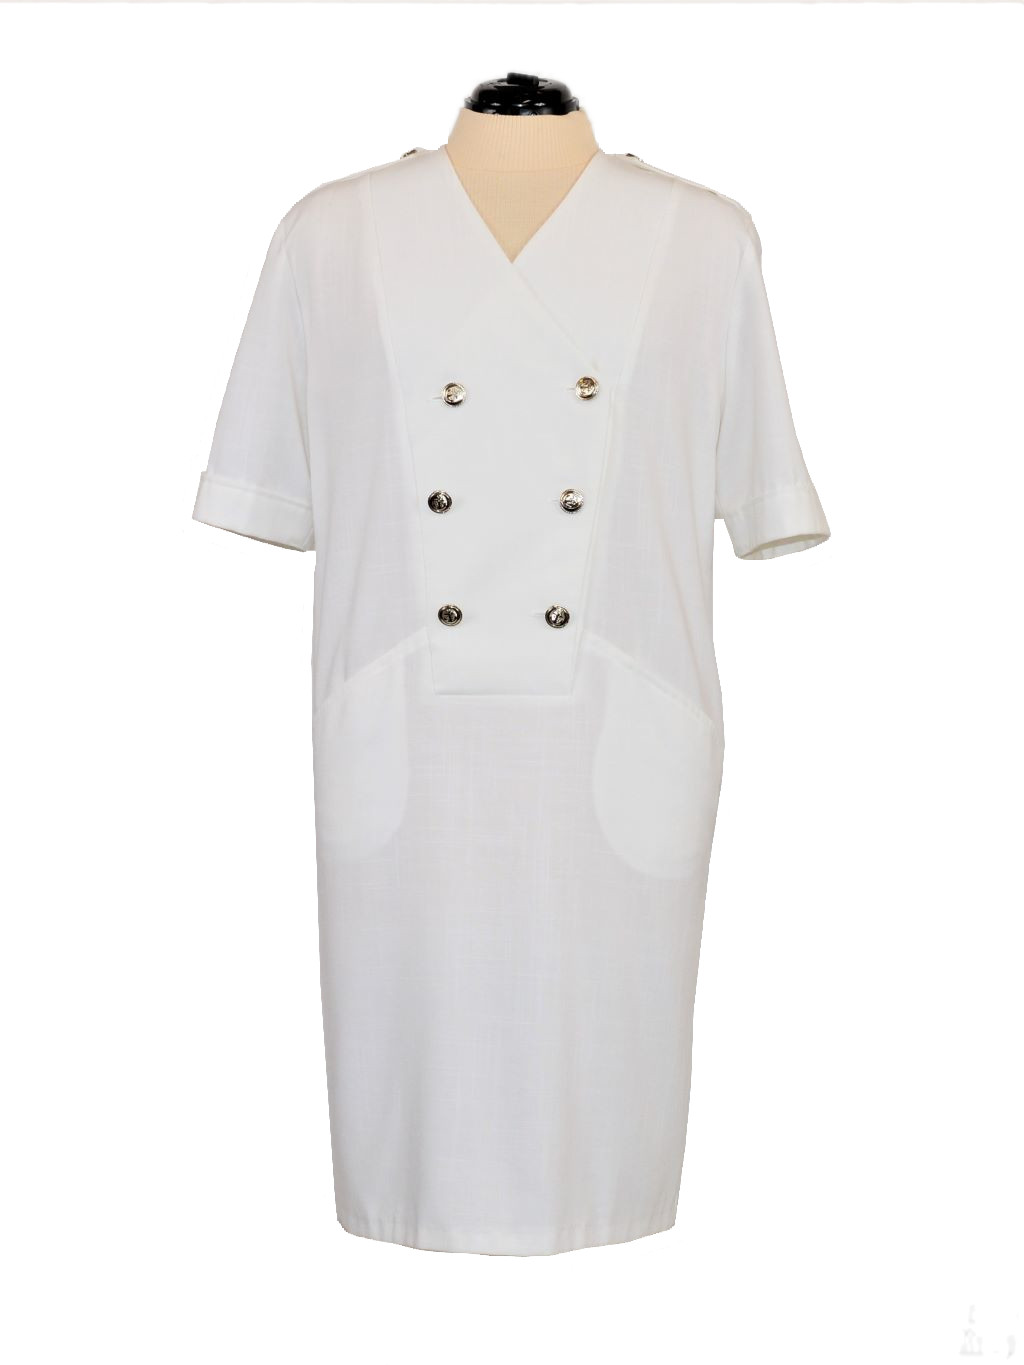 White sailor style dress - Metsvintage - second hand clothing online shop